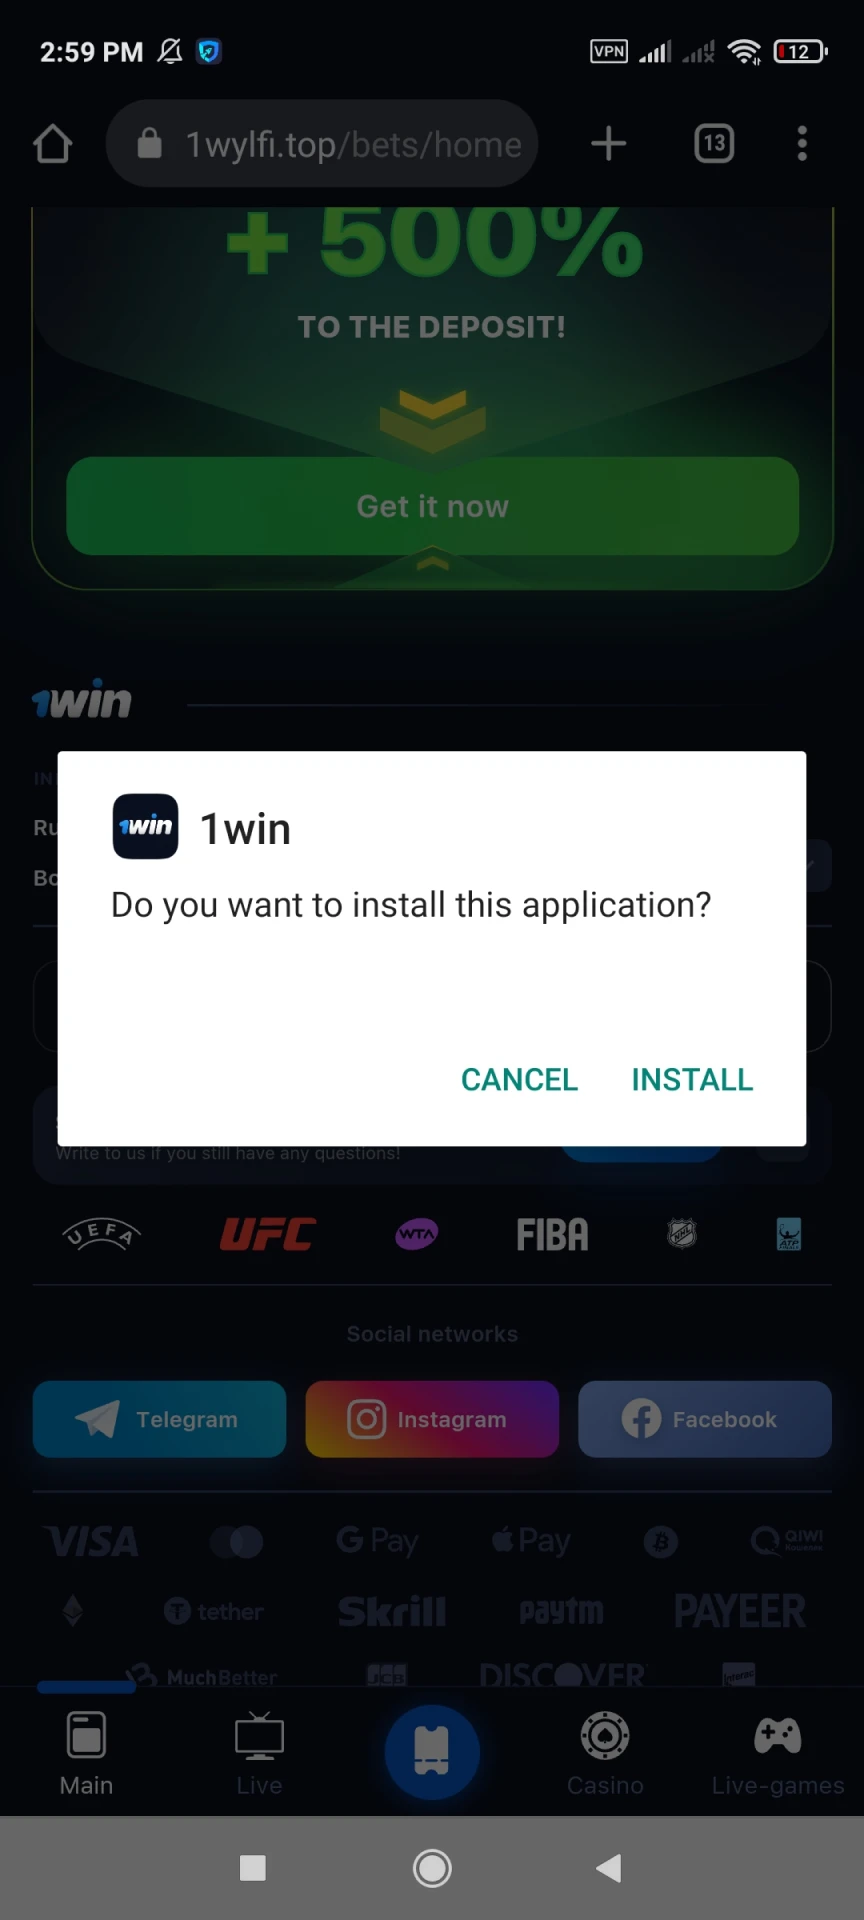 Install the 1win app on your smartphone.